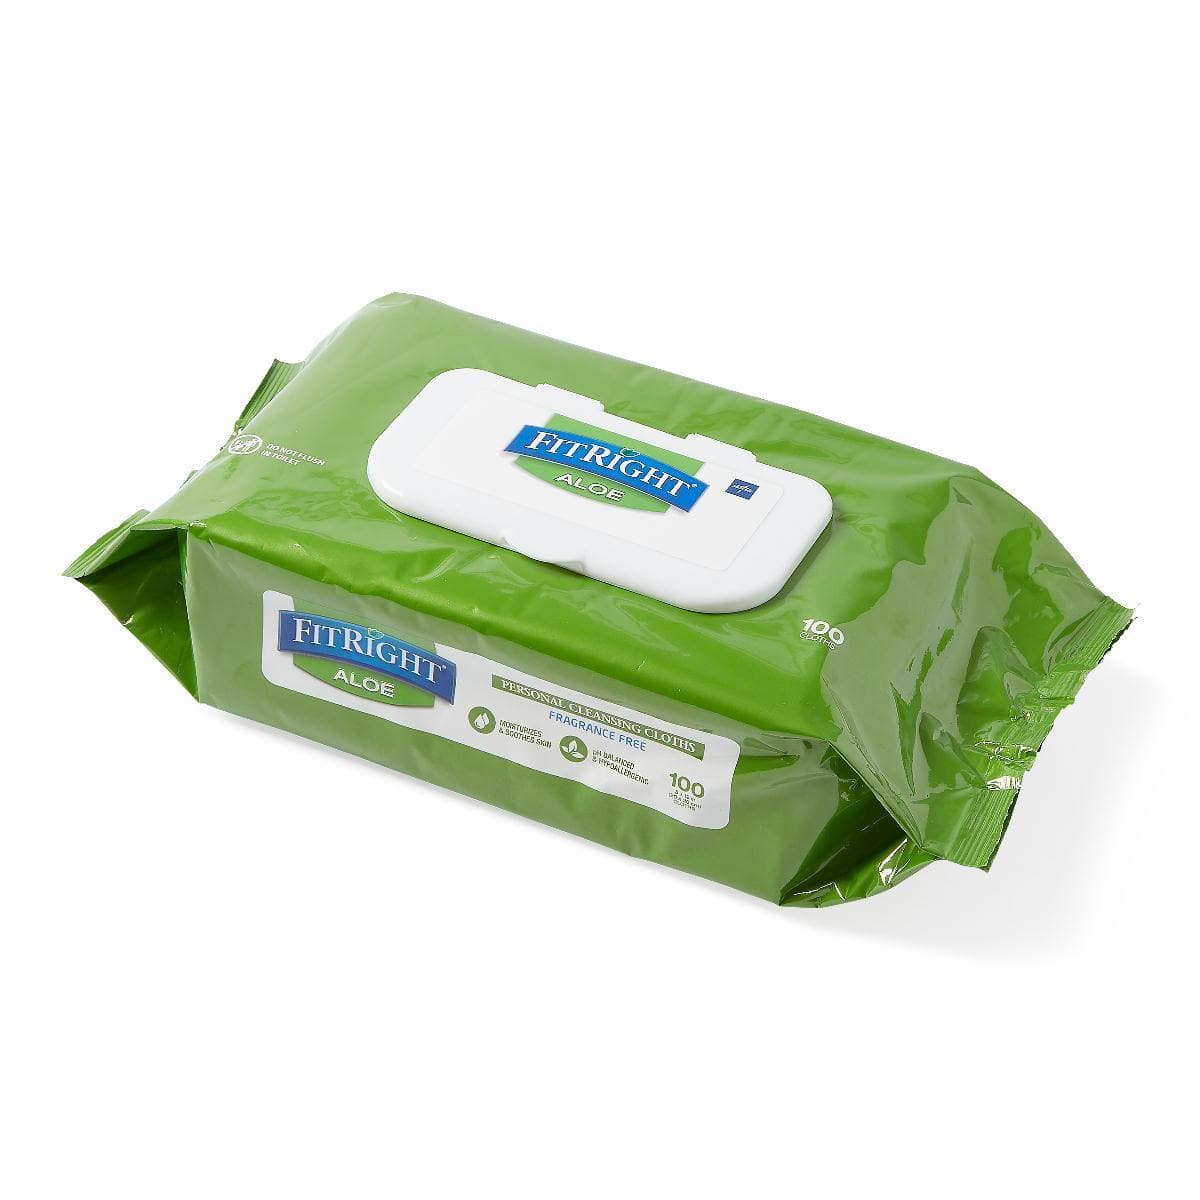 FitRight Diapers, Underwear and Wipes 